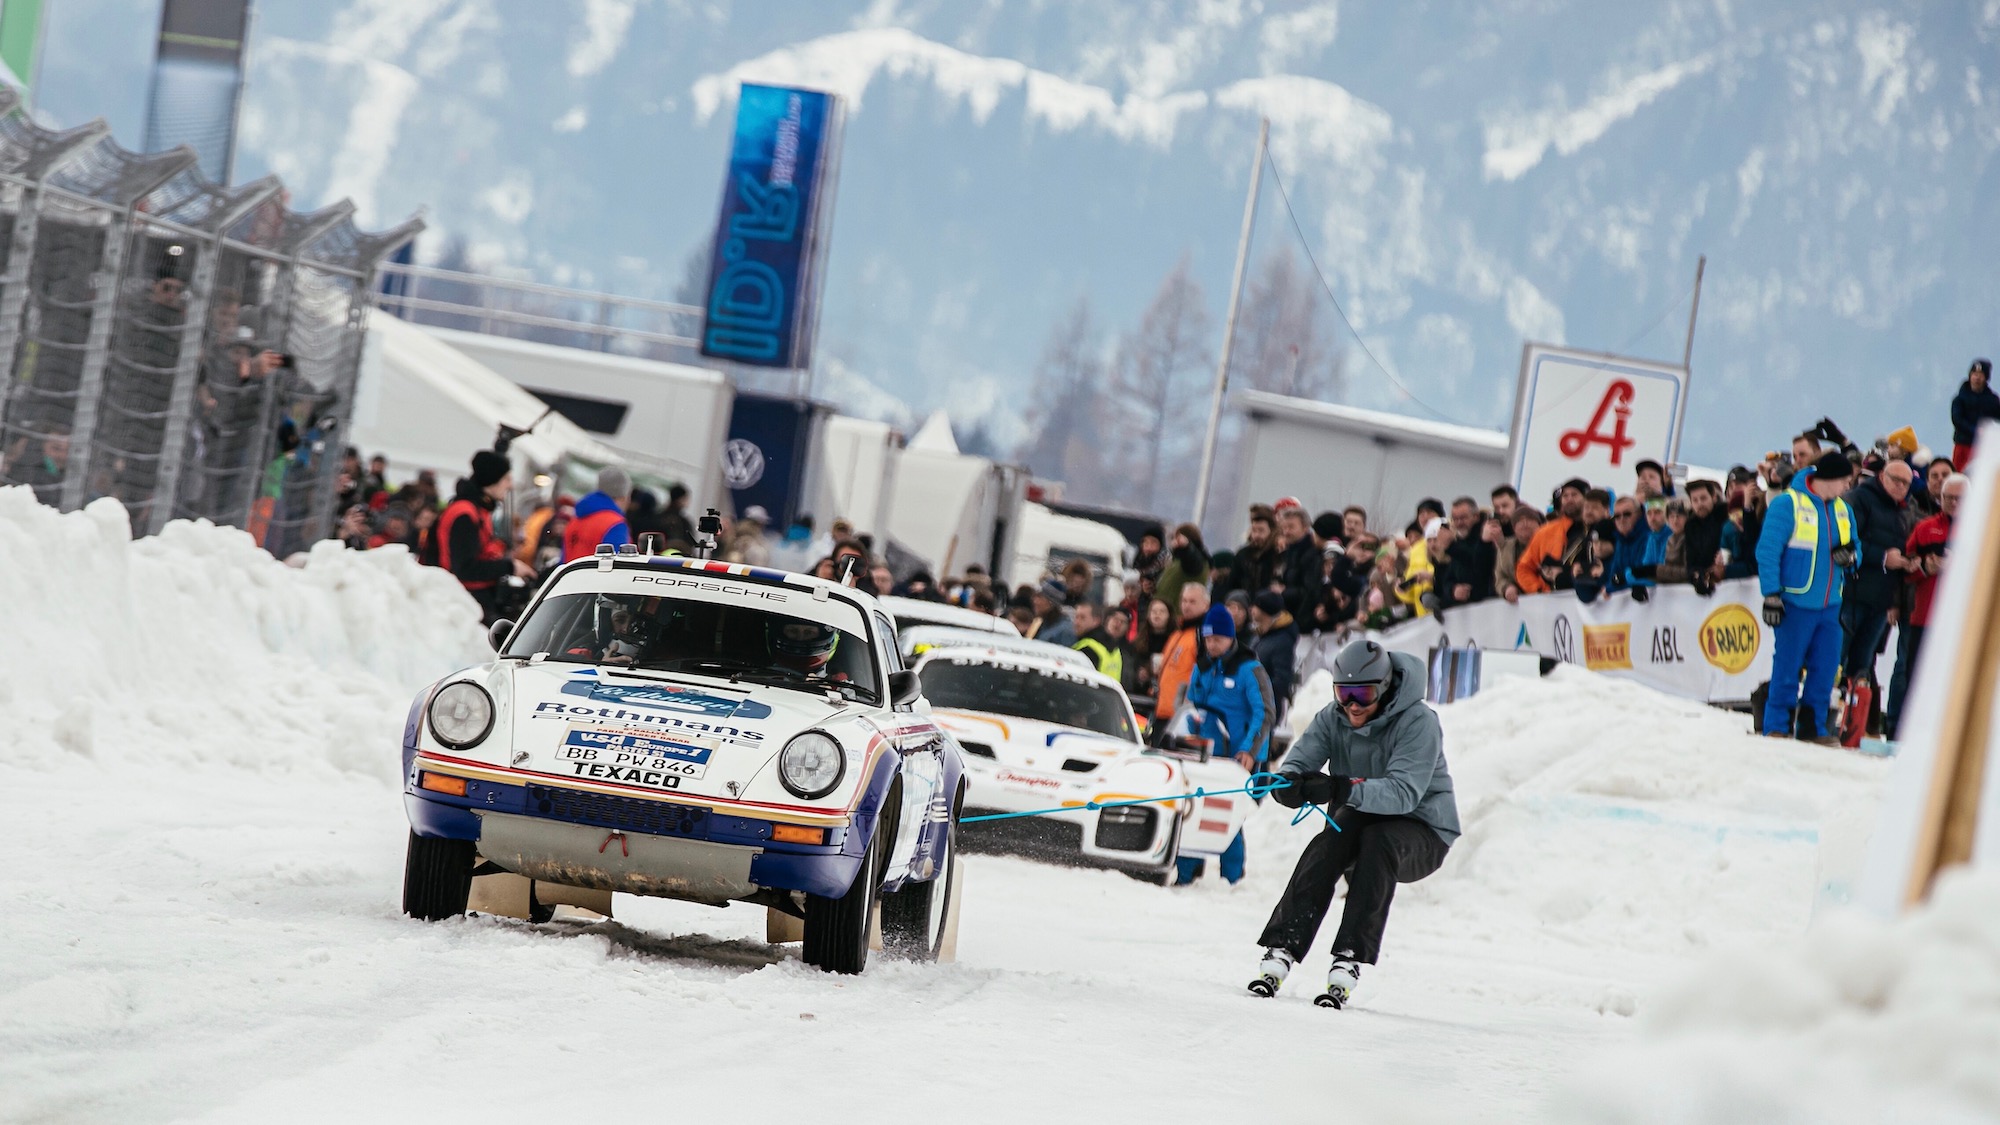 Skijoring with Porsche cars on snow in Zell am See